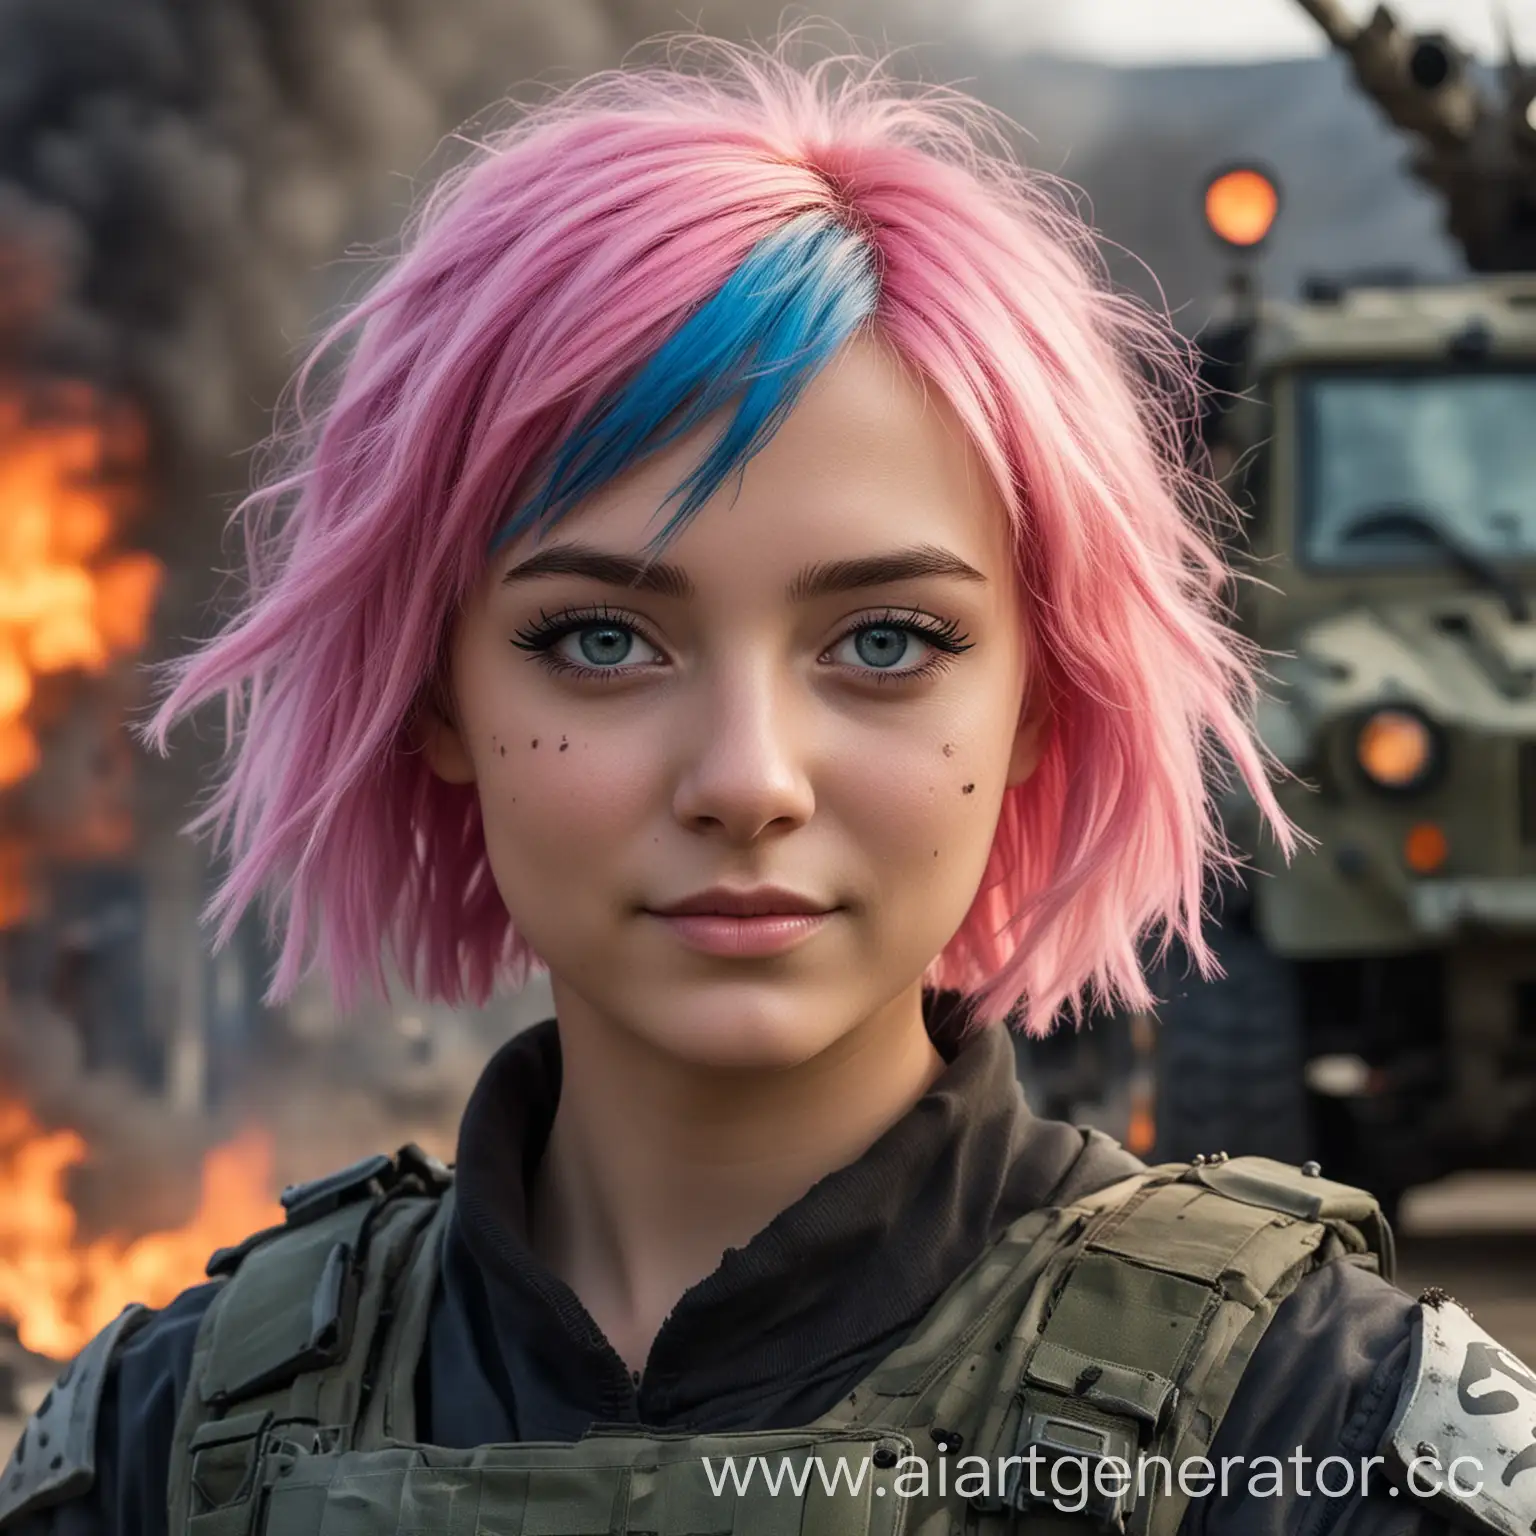 a high quality, professional photo of a girl about 16 years old, with beautiful makeup under the eyes resembling a panda, dressed in special forces armor. The photo should be taken in a short, full-length format, showcasing her unique style. She has a sweetheart expression, emphasizing her youthful charm. A scar near her eye adds depth to her character, hinting at a hidden story.

In the background, a military vehicle is on fire, adding a sense of urgency and drama to the scene. Despite the chaos, the girl is smiling confidently into the frame, embodying resilience and strength. Her pink-blue hair is styled in a trendy wavy bob, adding a touch of modernity to the overall look.